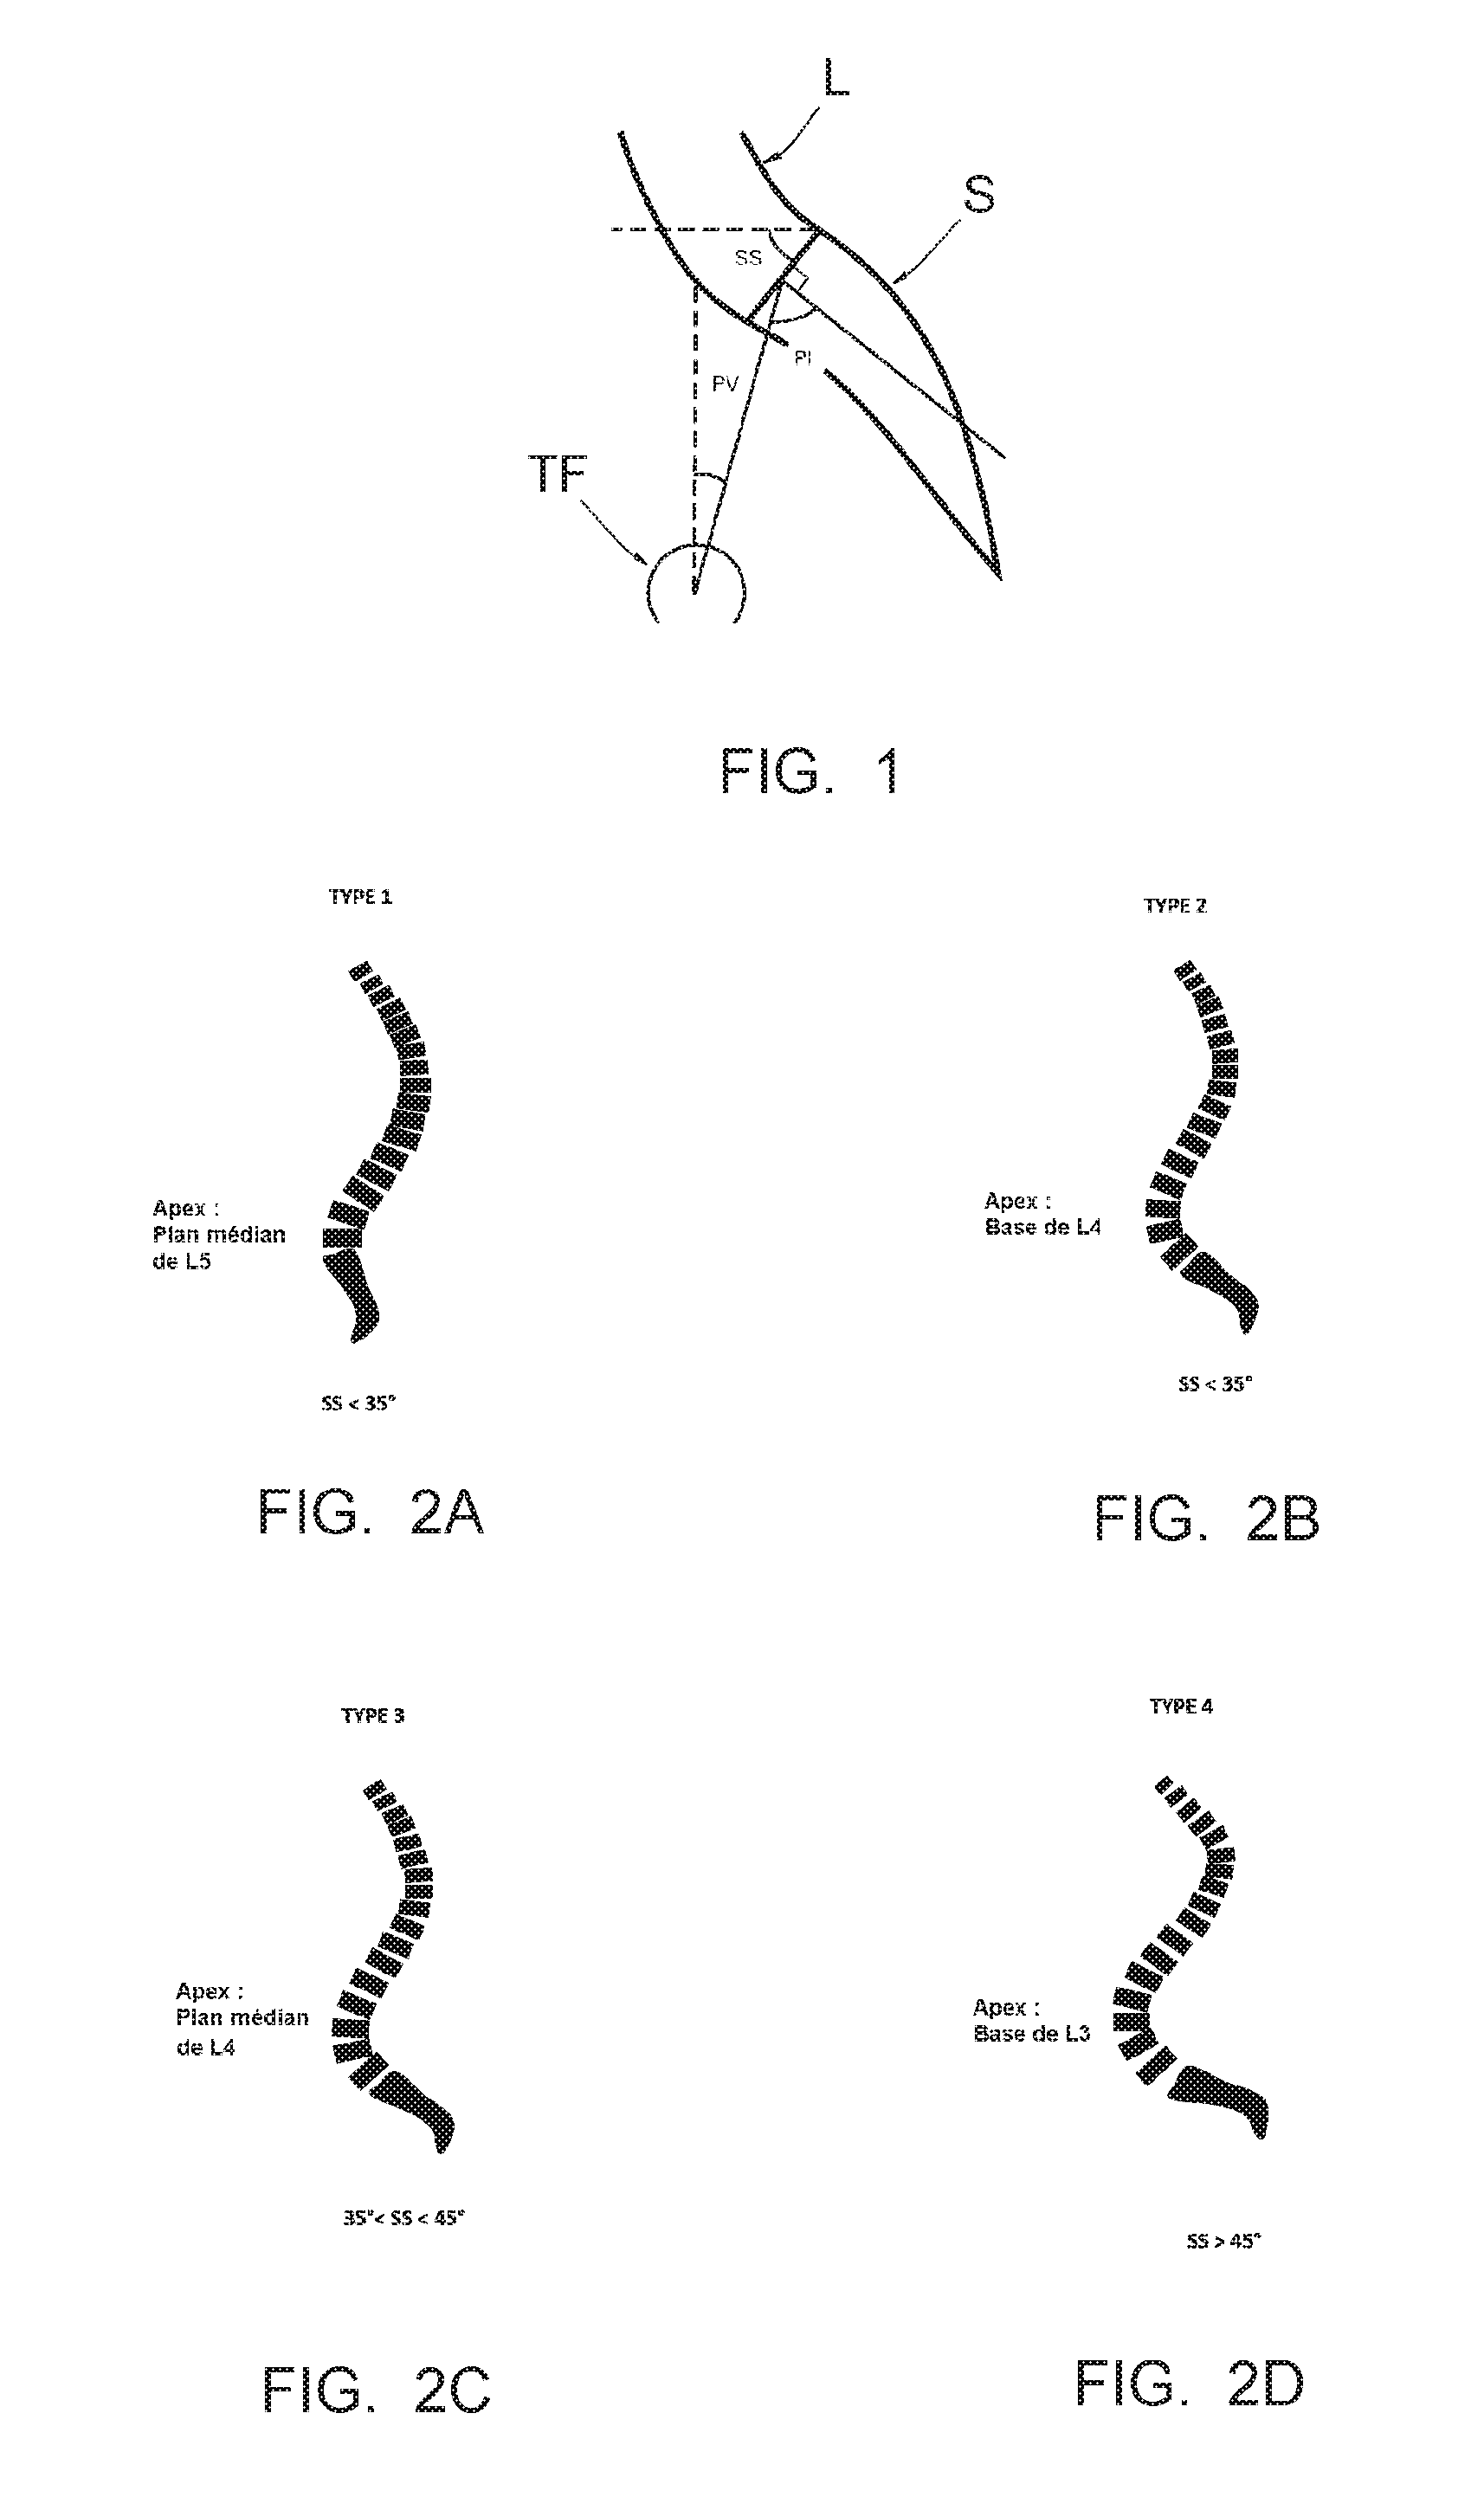 Method making it possible to produce the ideal curvature of a rod of vertebral osteosynthesis material designed to support a patient's vertebral column